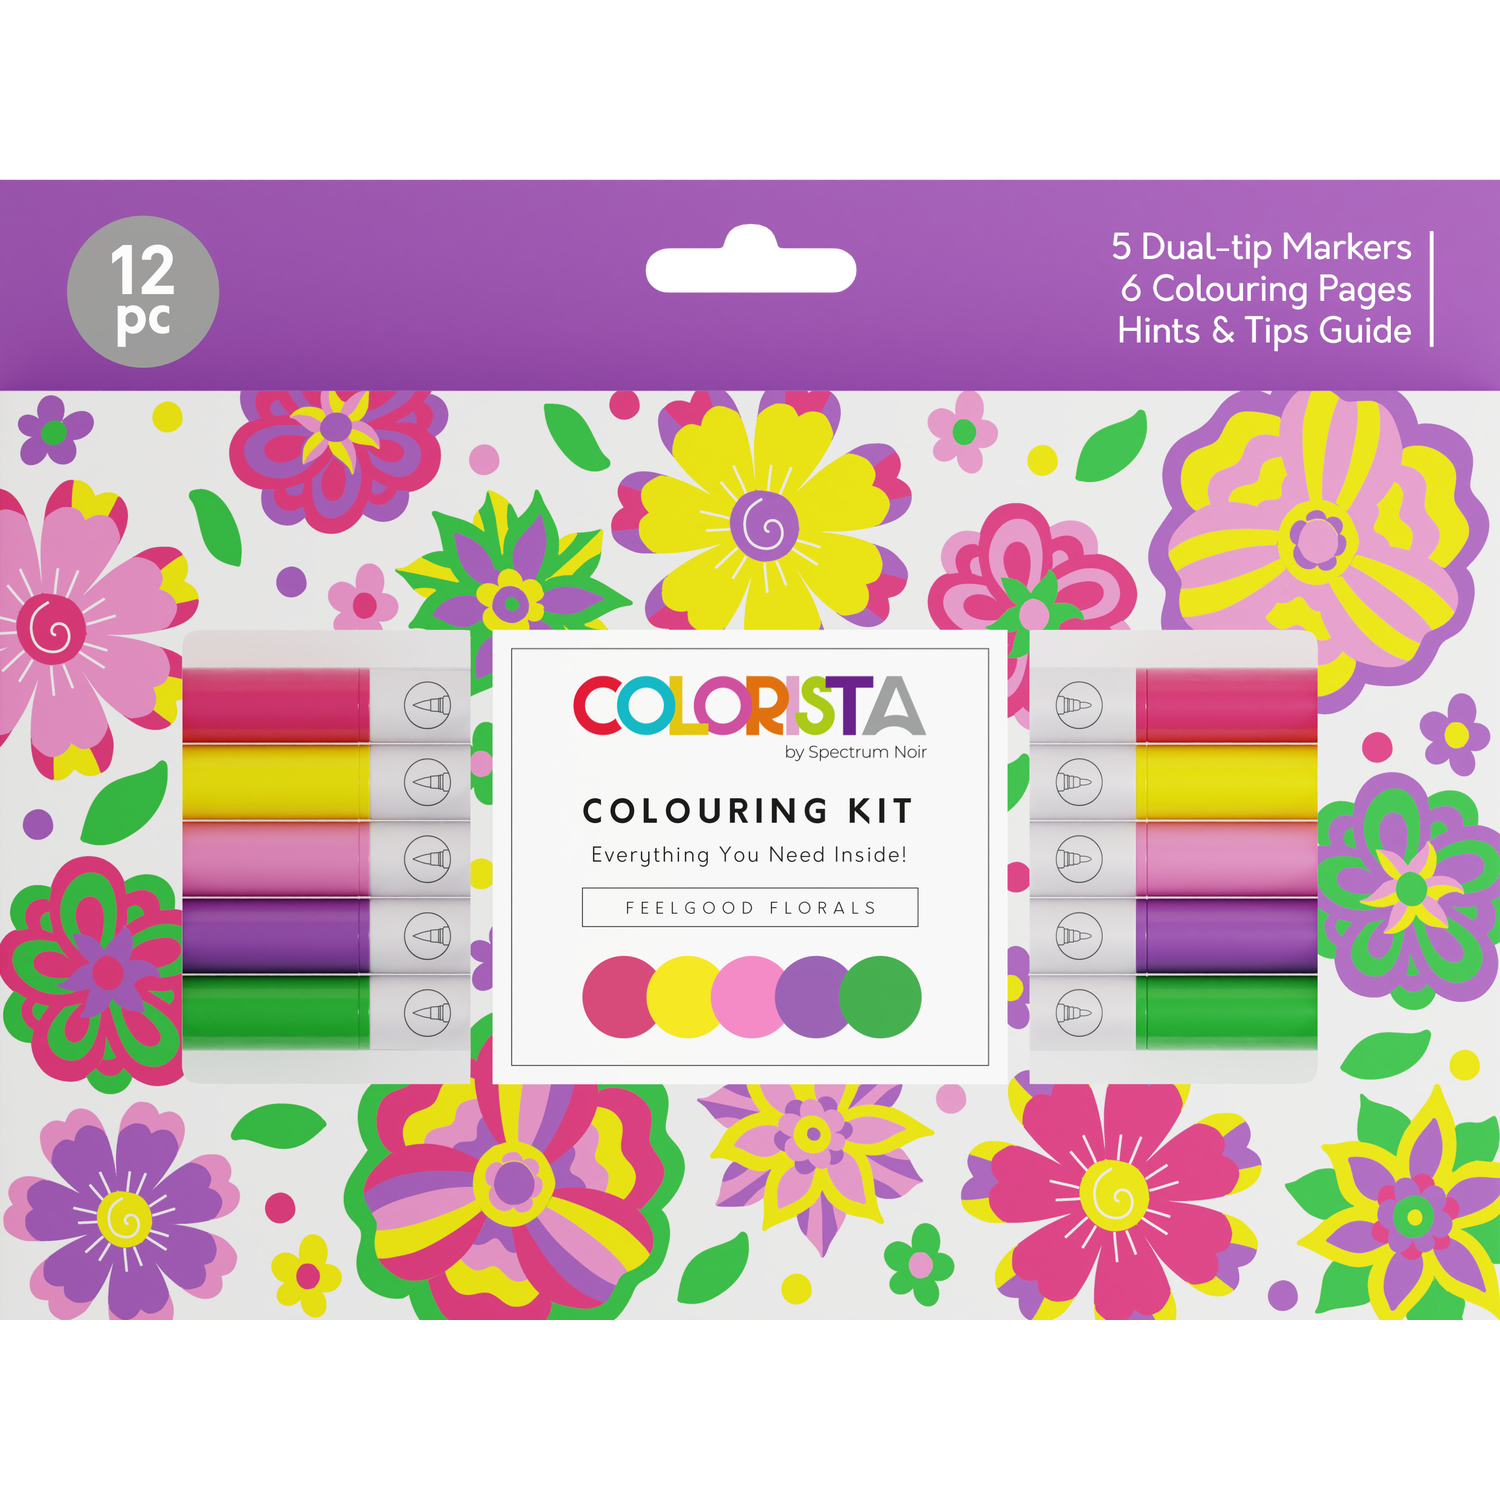 Colorista Colouring Kit - Feelgood Florals Image 1